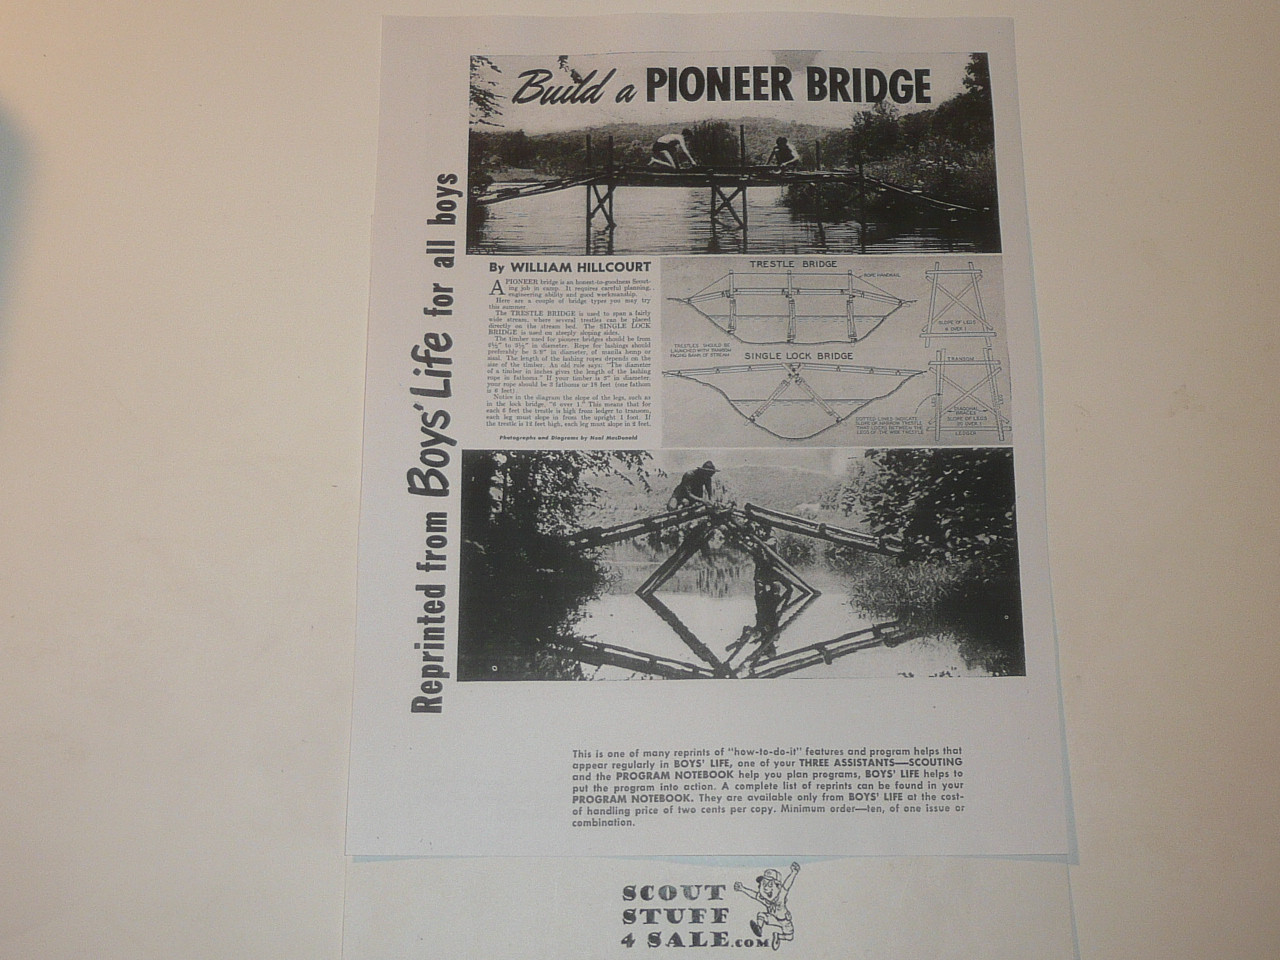 Pioneer Bridge, By Green Bar Bill, Boys' Life Single Topic Reprint from the 1950's - 1960's , written for Scouts, great teaching materials